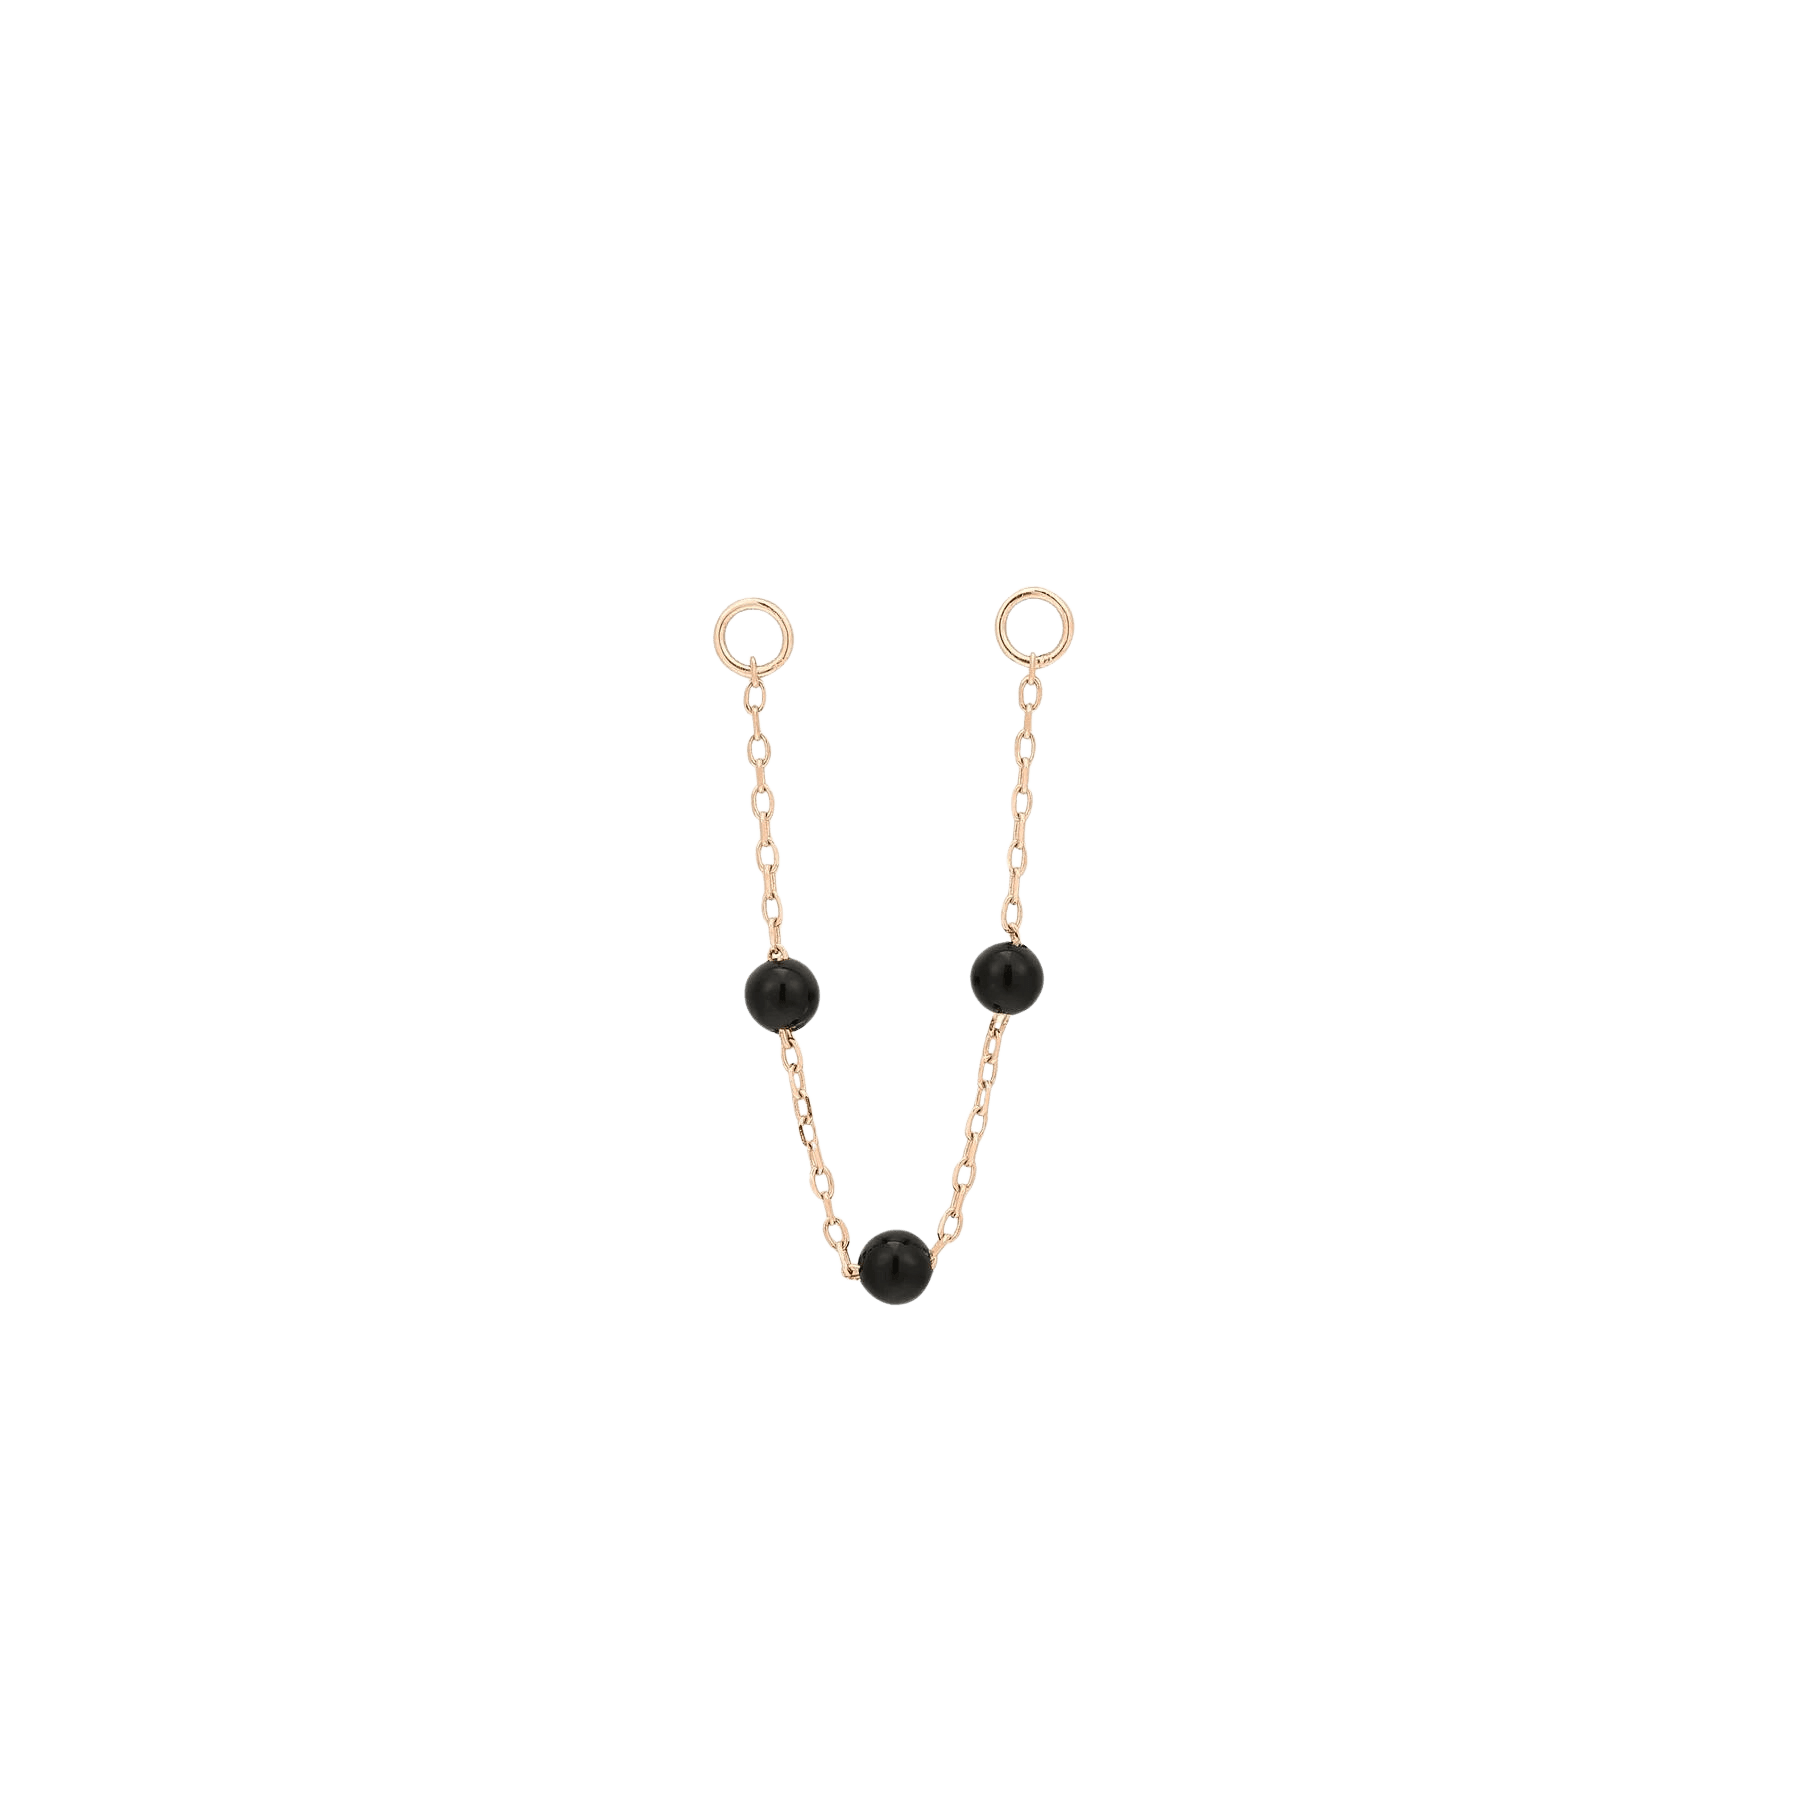 3 Bead Black Agate Chain - Solid 14Kt Gold